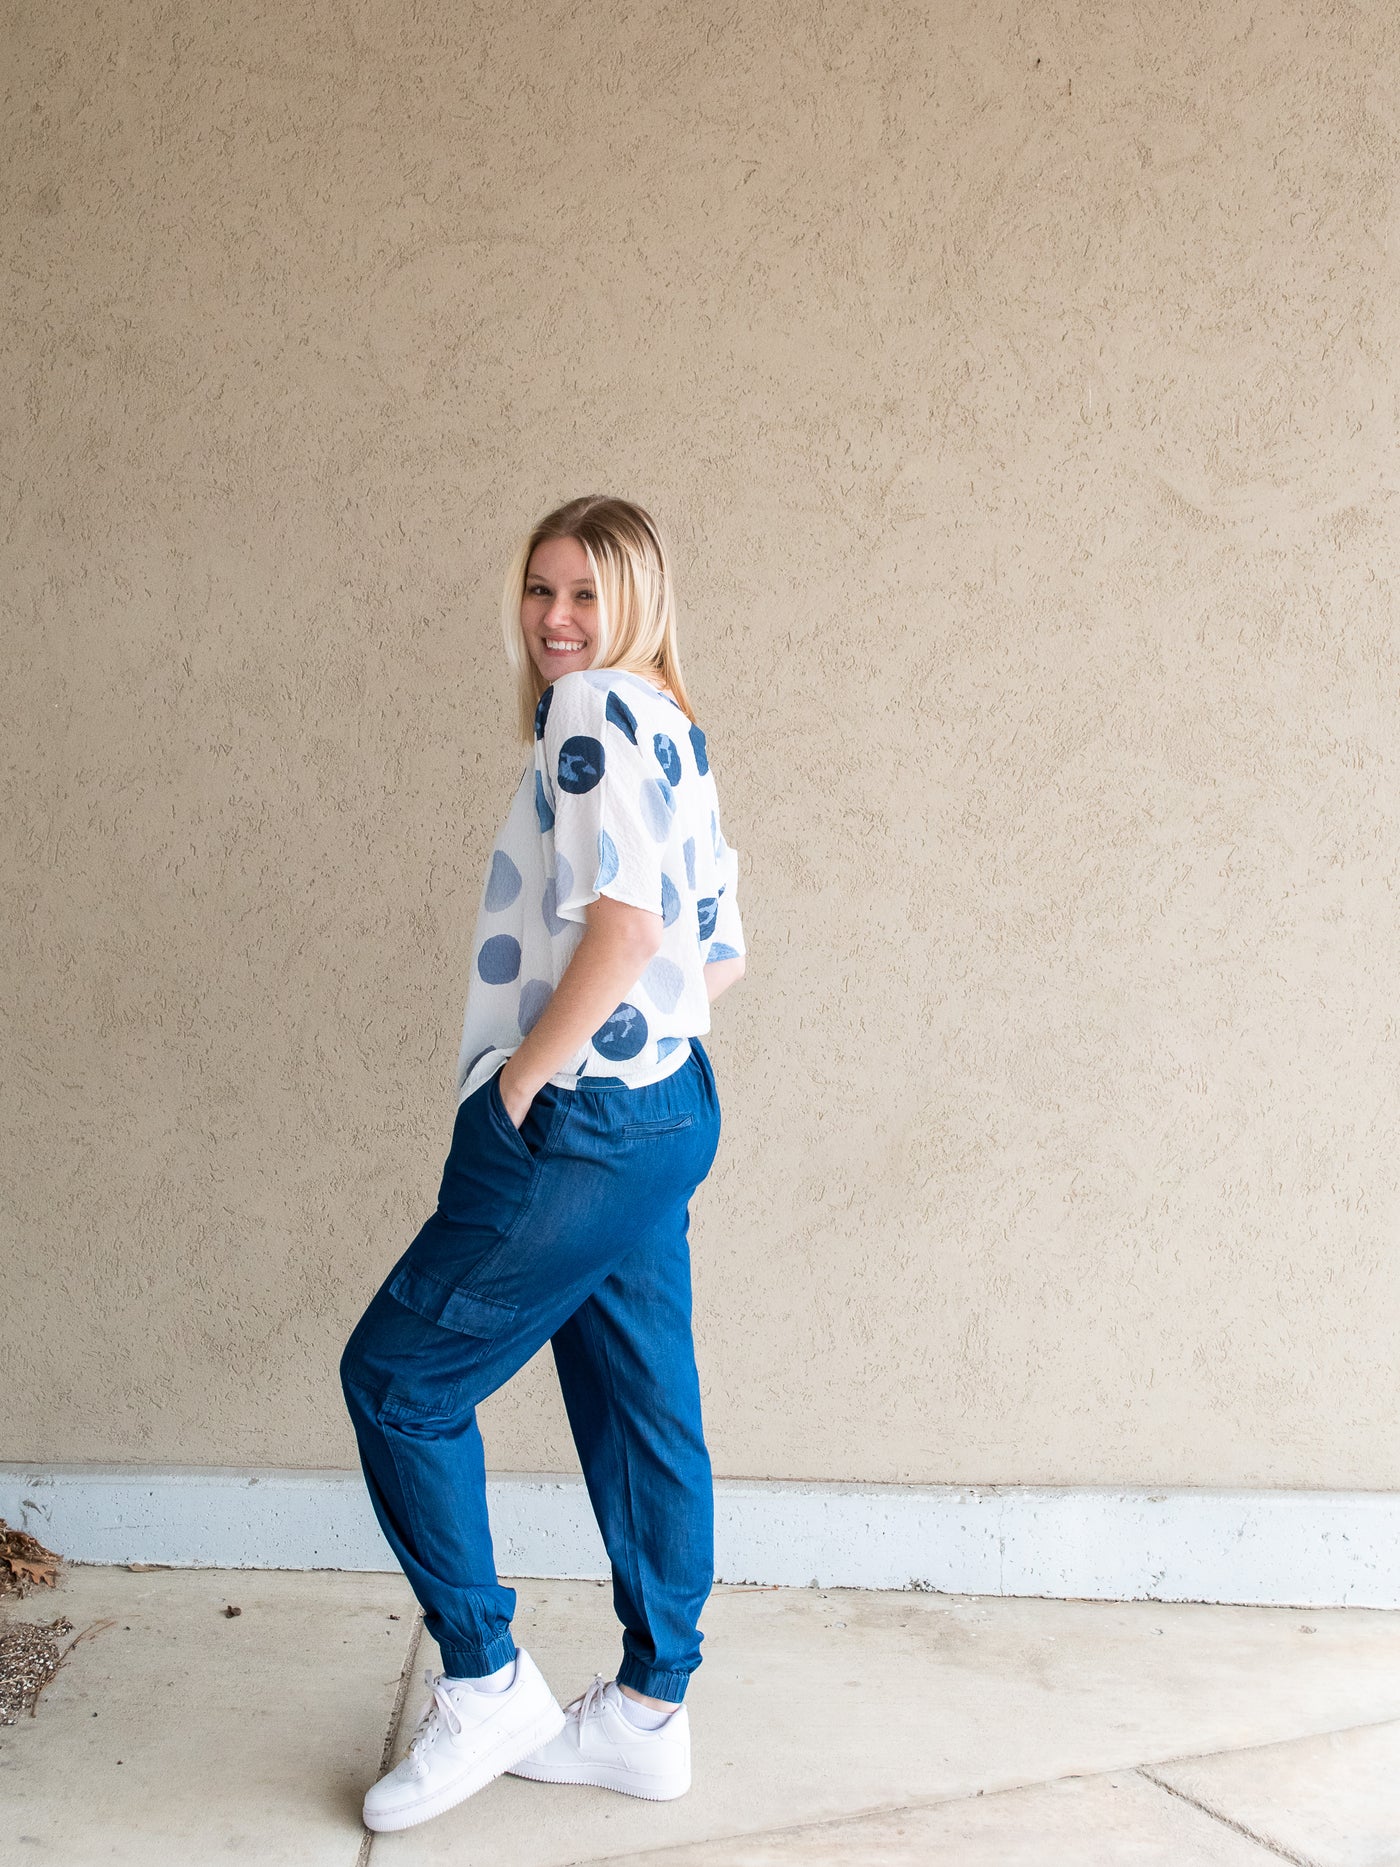 A model wearing a short sleeve white blouse with different shades of blue polka dots. She has it on with denim joggers and white sneakers.